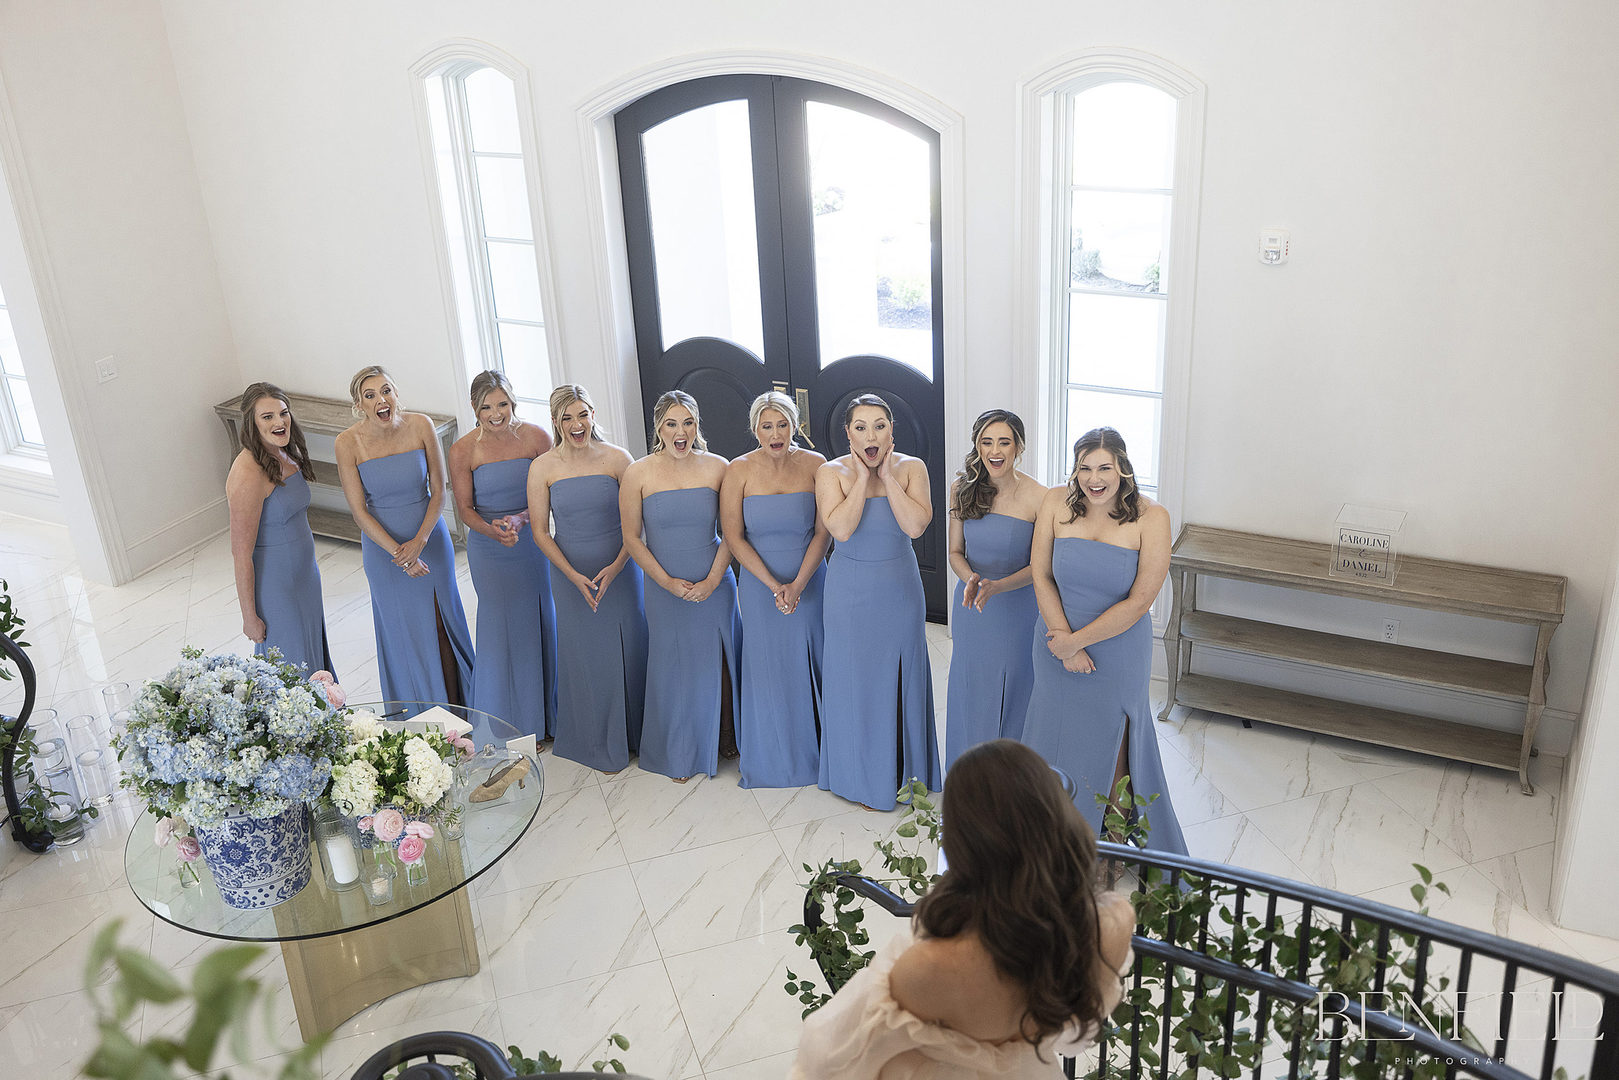 Designer Bride's first look with her bridesmaids on the wedding day as she descends the royal staircase at Hillside Estate in Texas